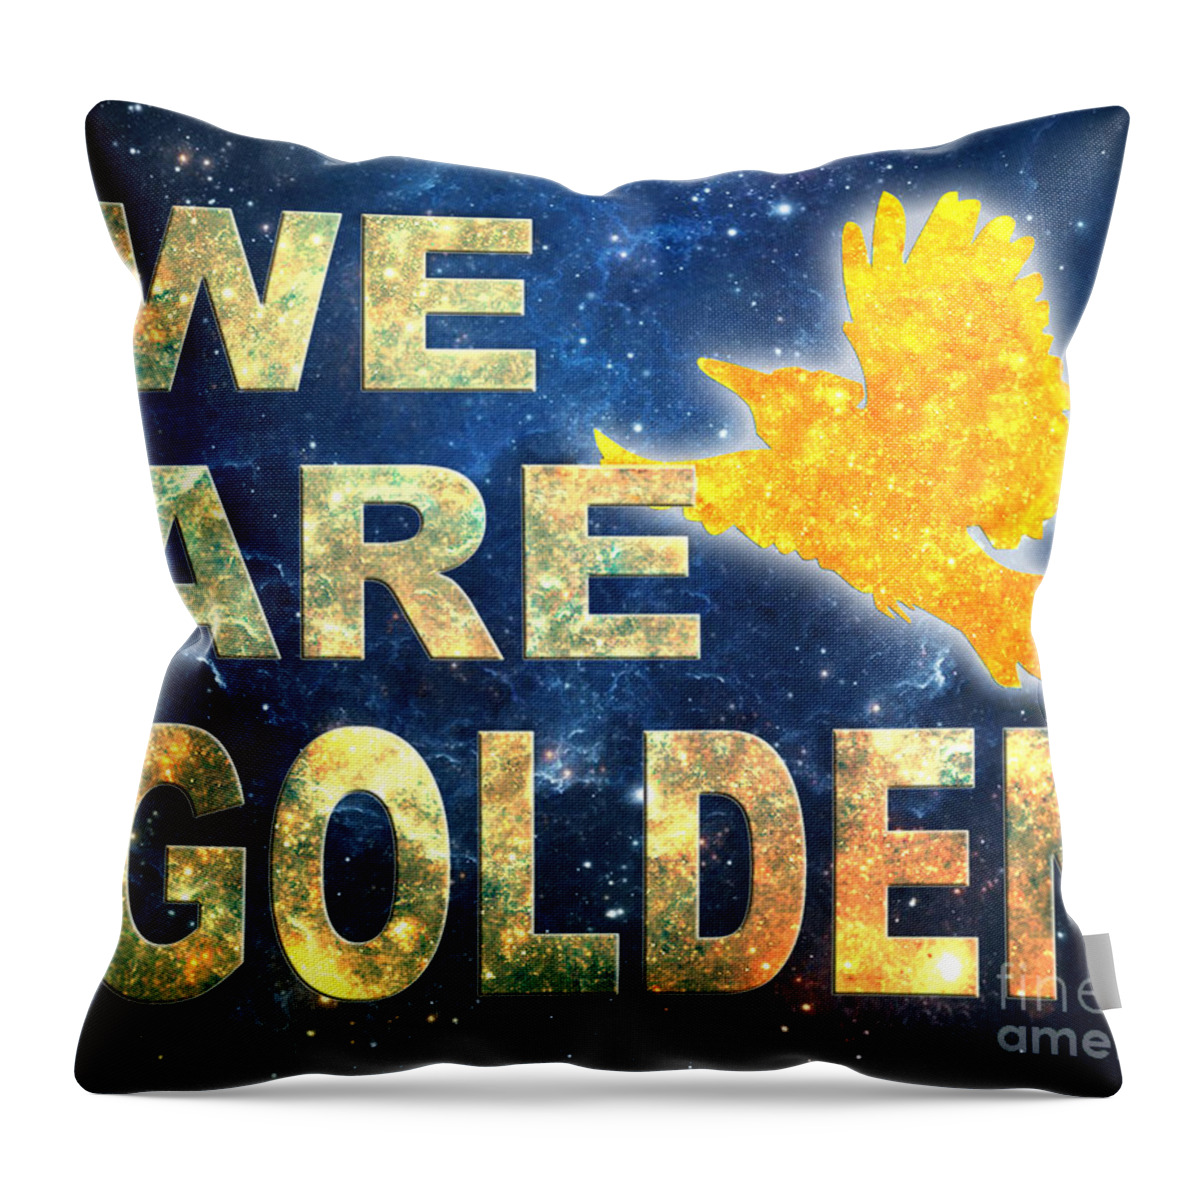 We Are Stardust Throw Pillow featuring the digital art We Are Golden by Ginny Gaura